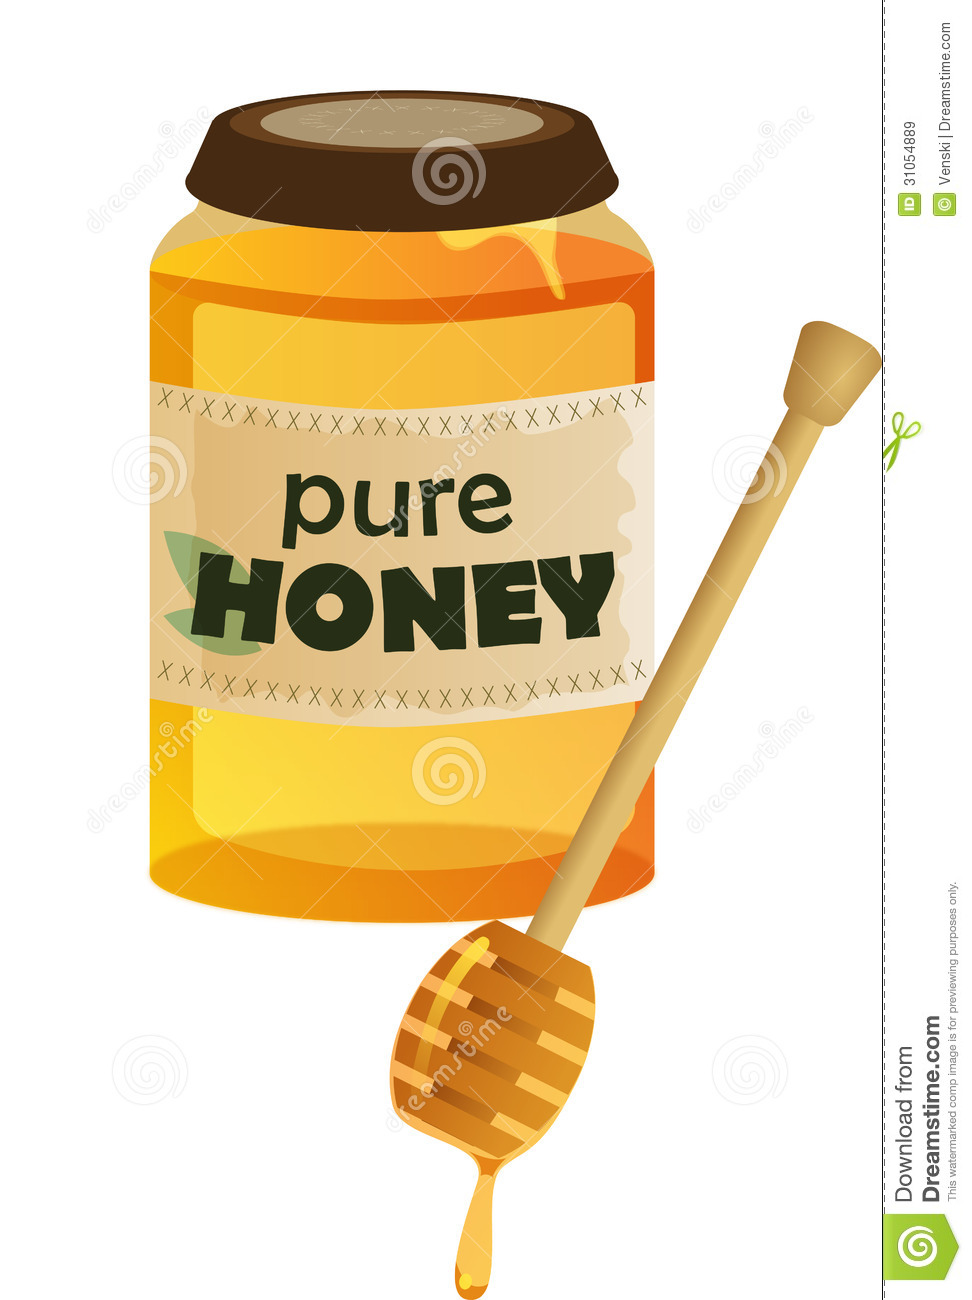 Honey Jar With Dipper Royalty Free Stock Images   Image  31054889